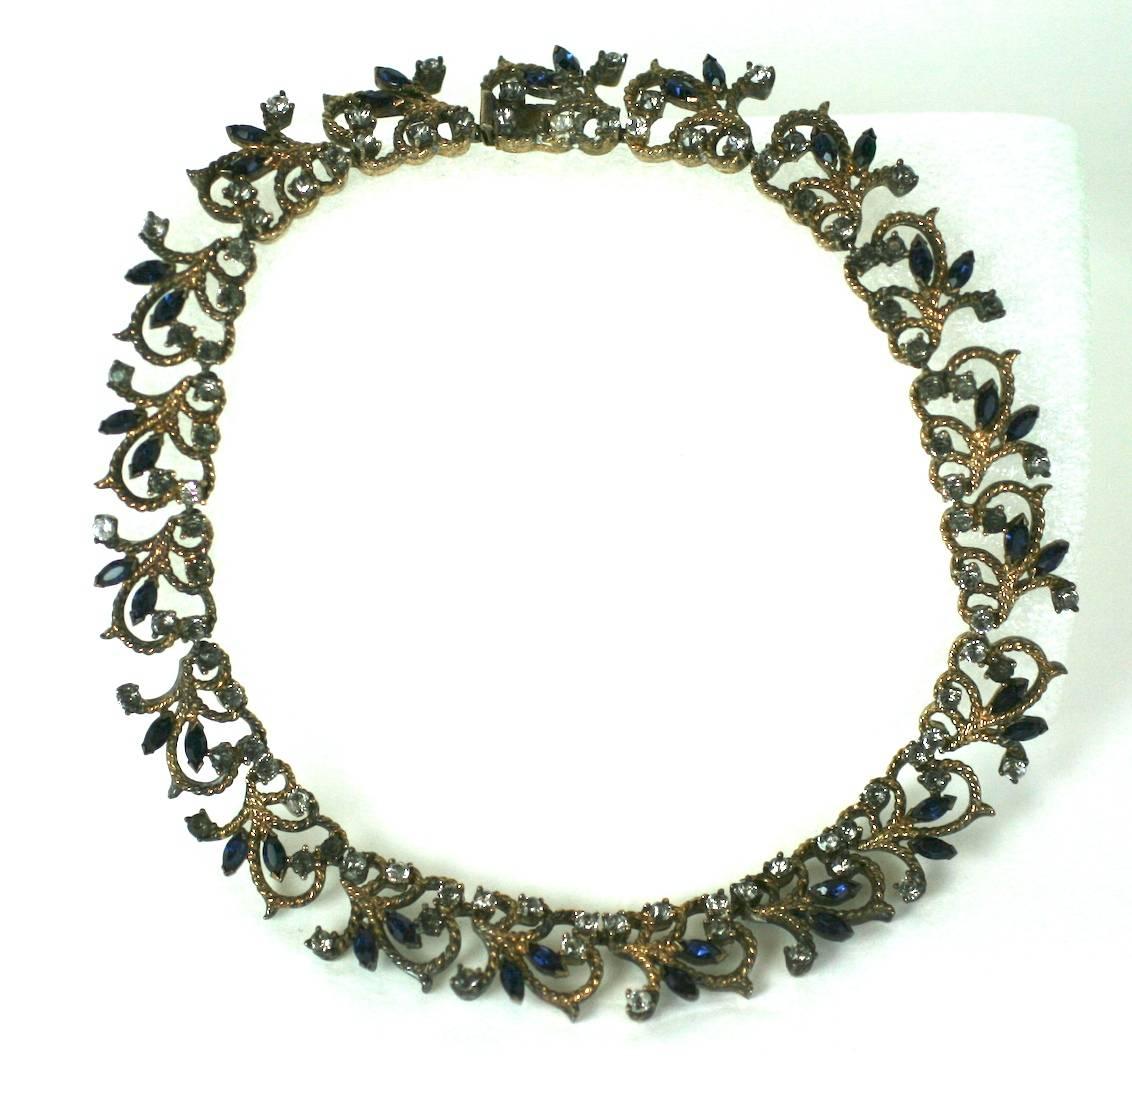 Elegant gilt sterling silver faux sapphire marquise and smoke grey crystal pave articulated collar necklace with vine and leaf motifs. 1940's USA. Excellent Condition.
Length 14.50